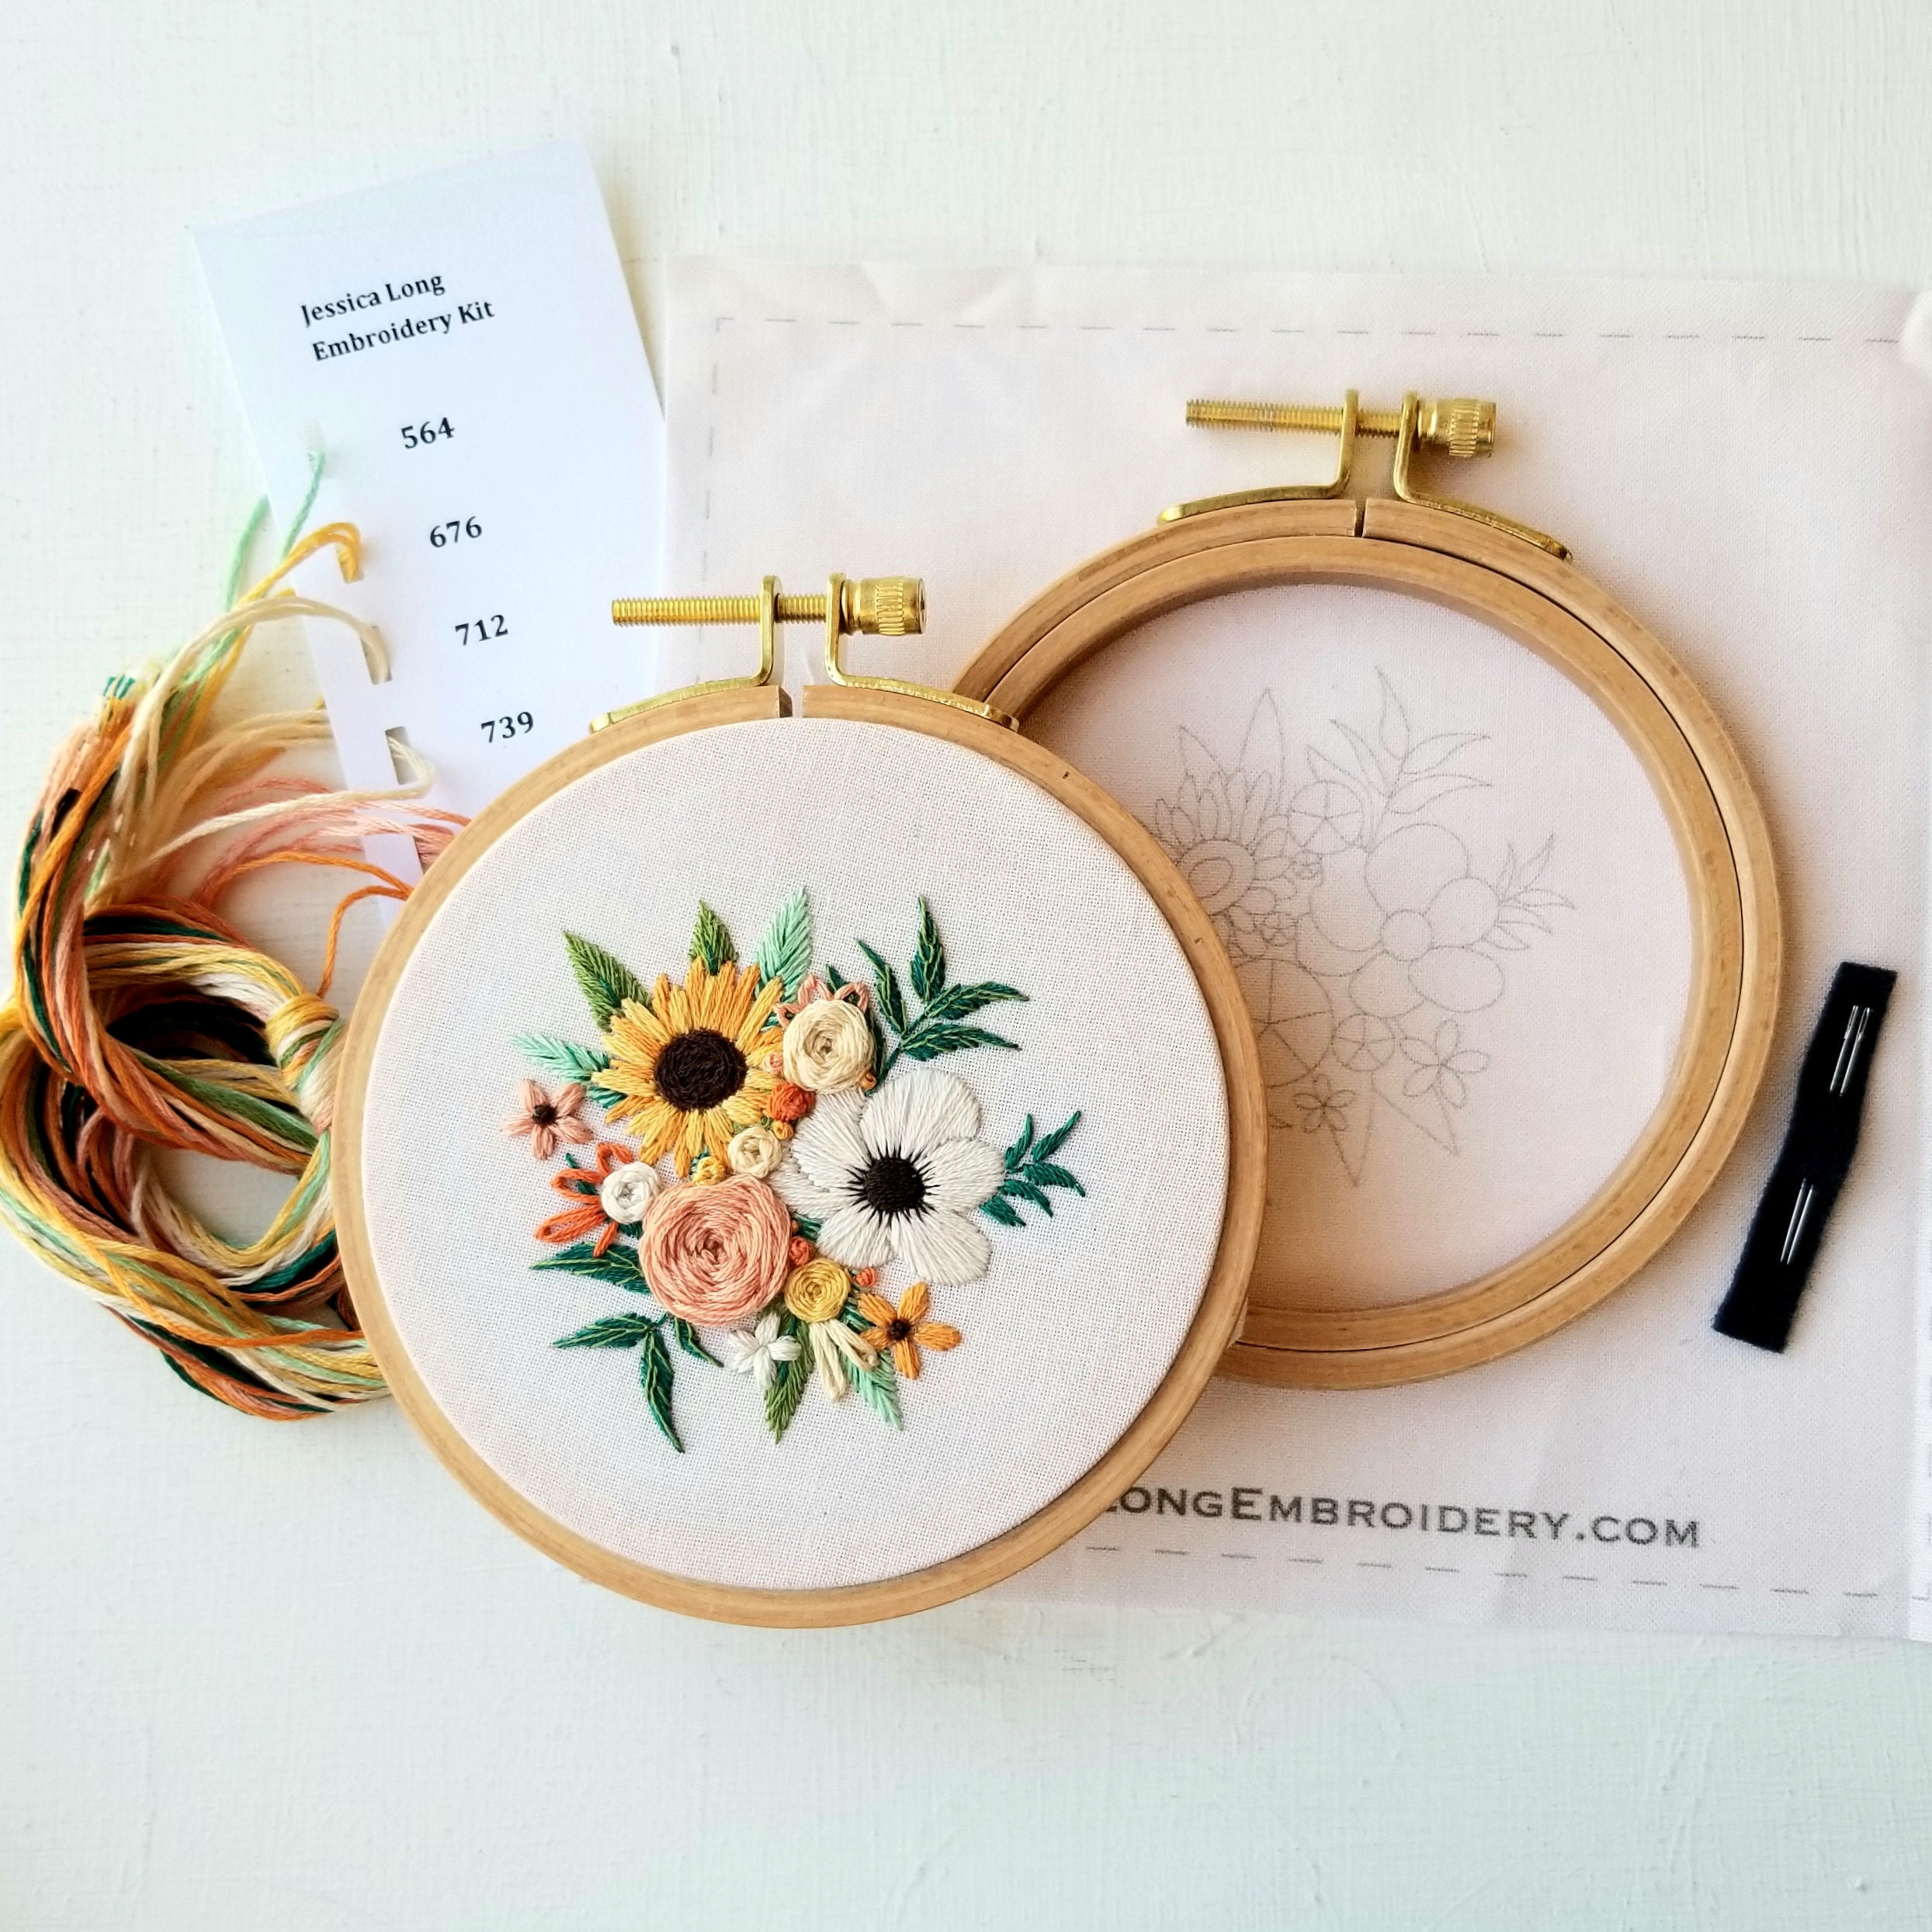 Just Peachy Embroidery Kit Floral Embroidery Kit Flower 